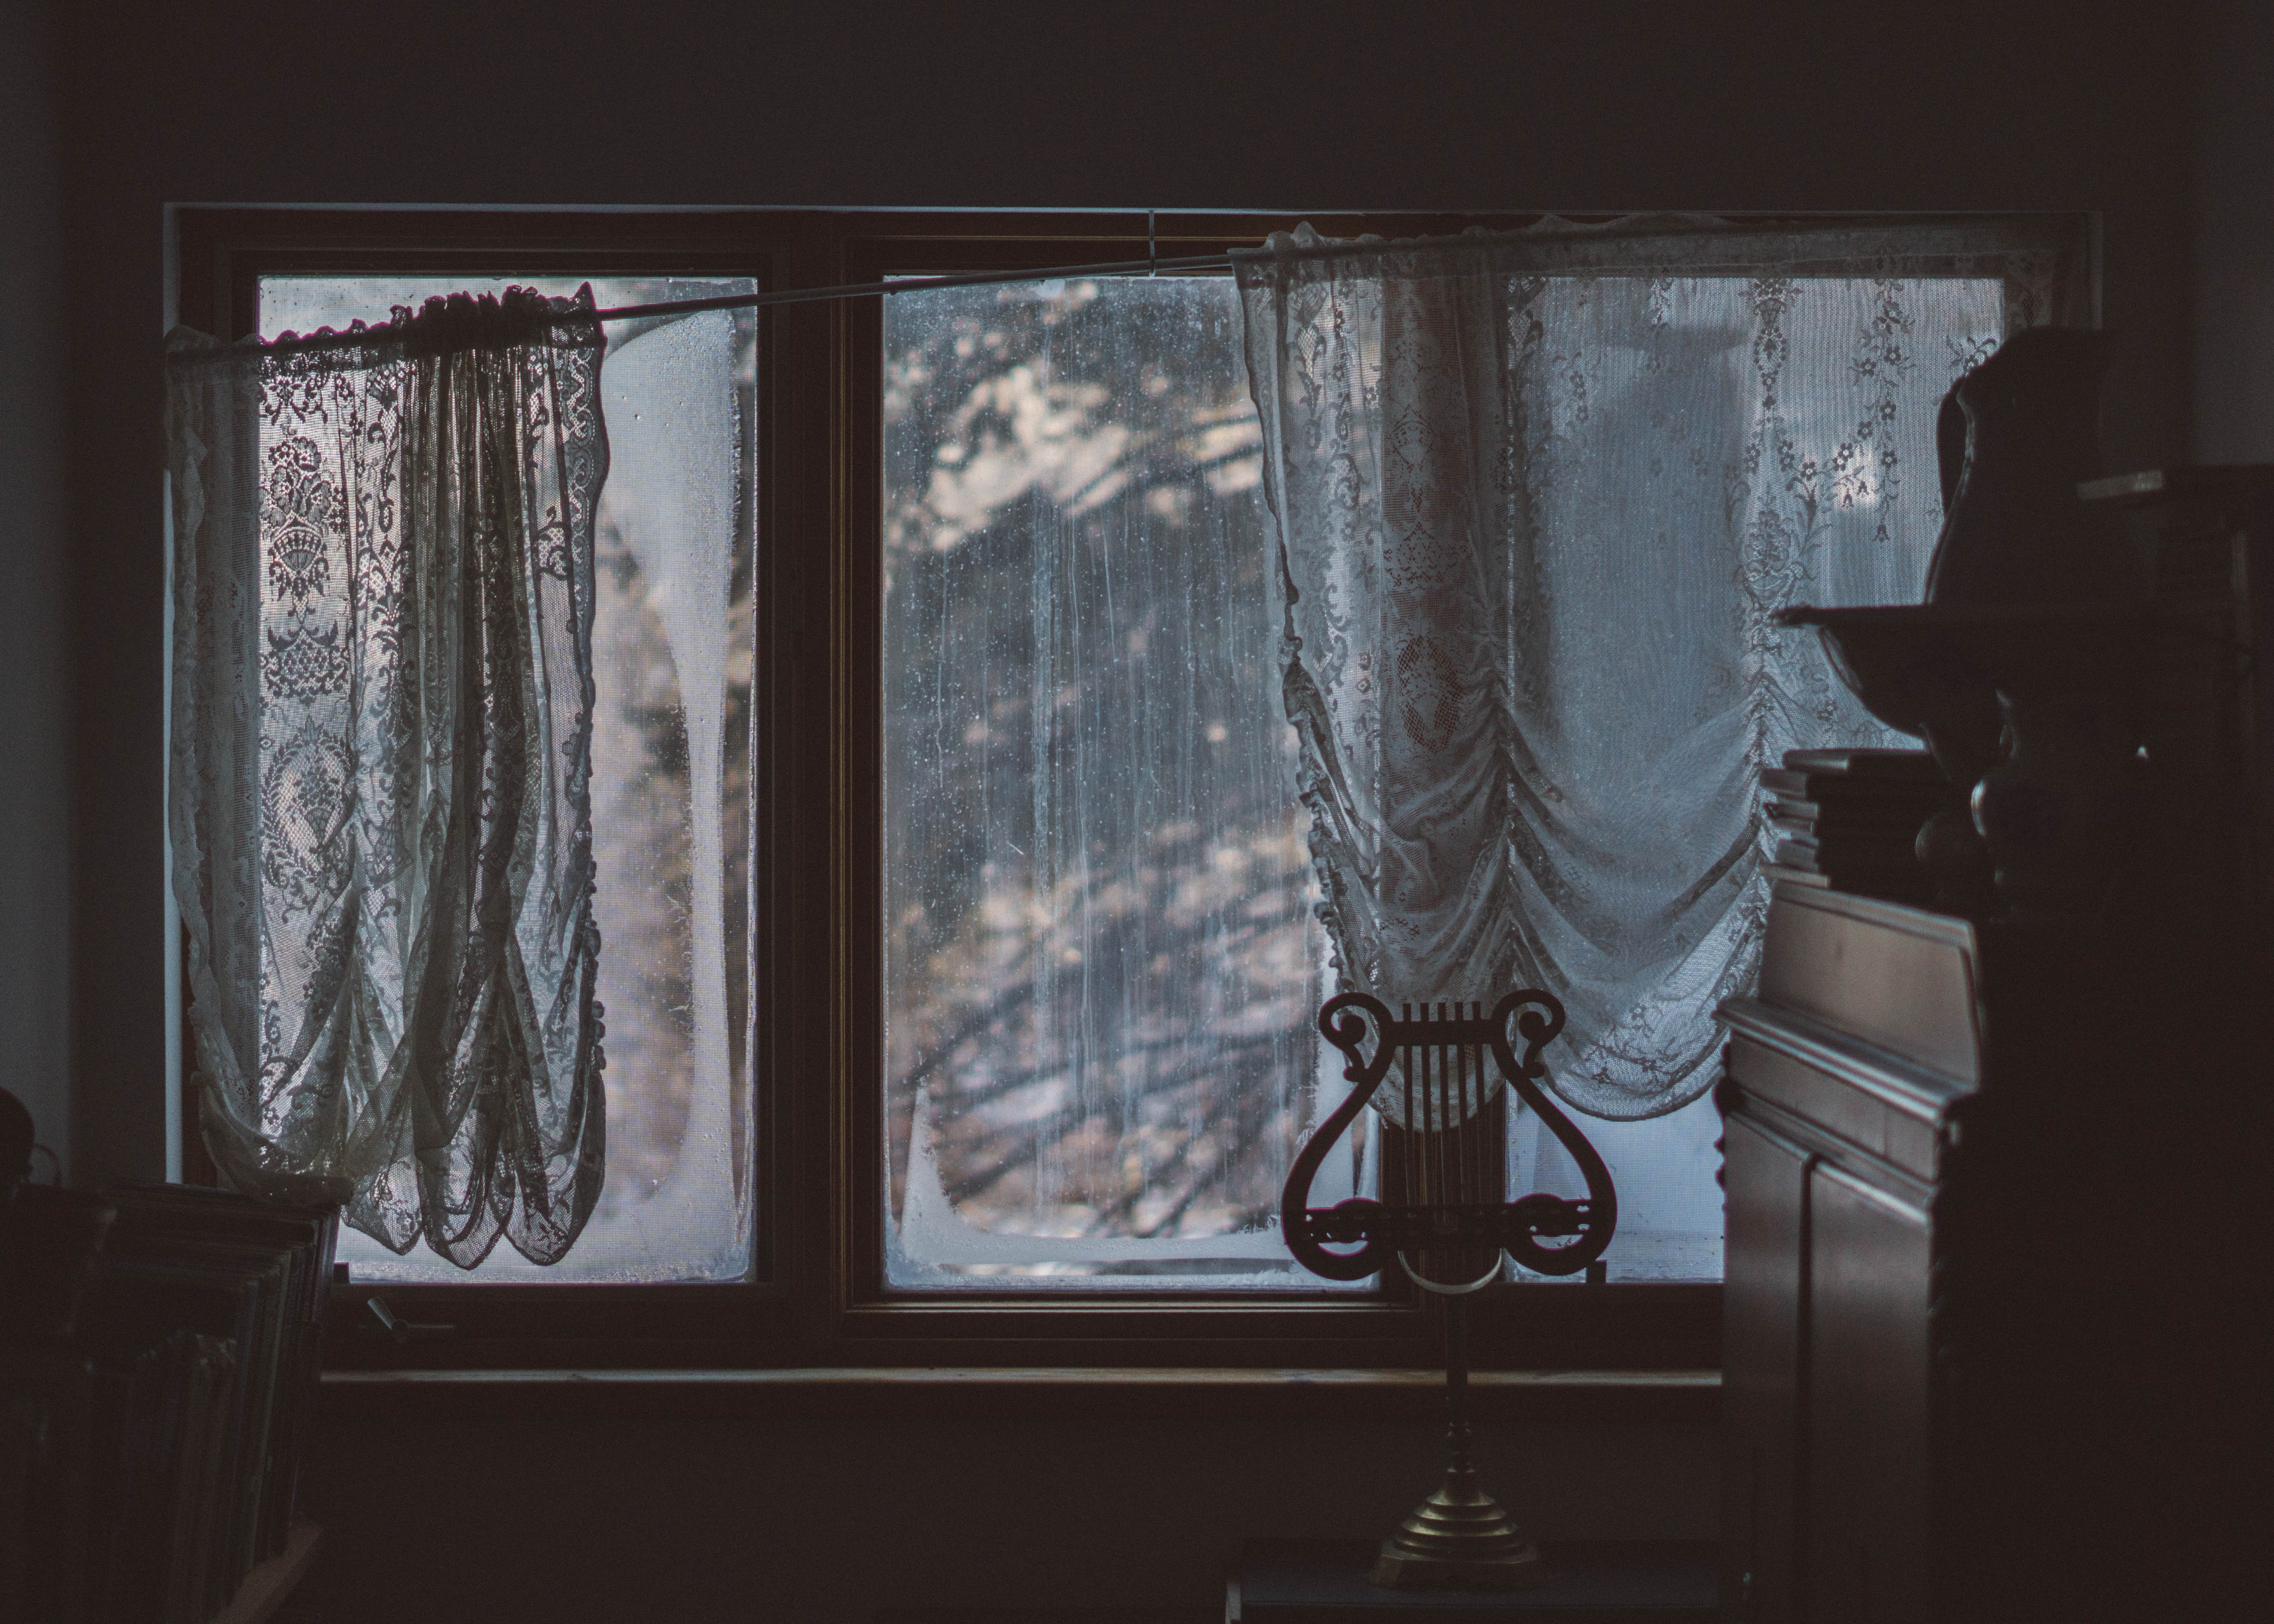 The first door led to a huge, dark parlor, with dirty white lace curtains draped limply over the windows. | Source: Unsplash